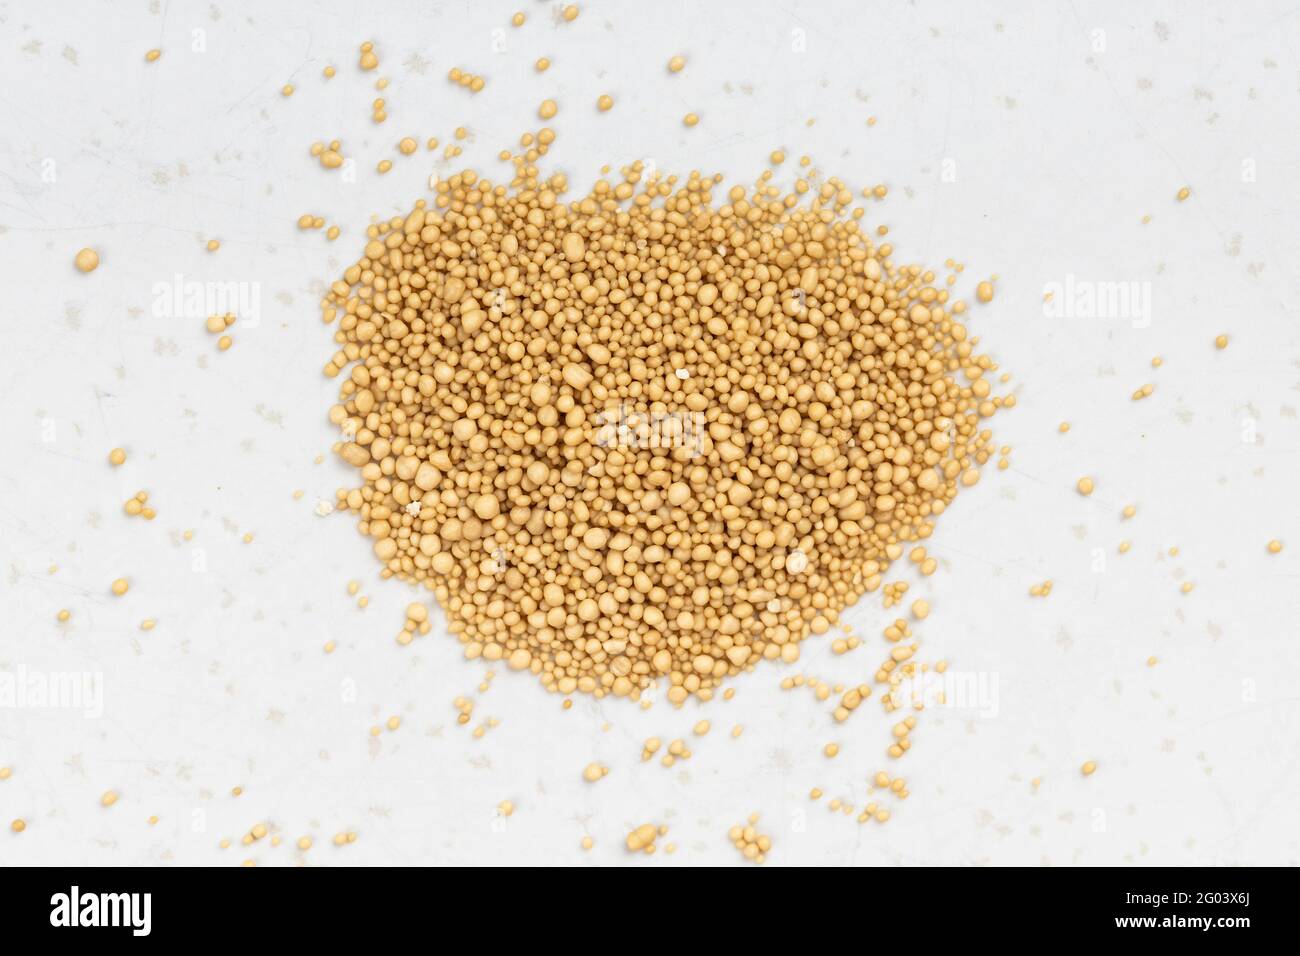 top view of pile of granulated dried yeast close up on gray ceramic plate Stock Photo